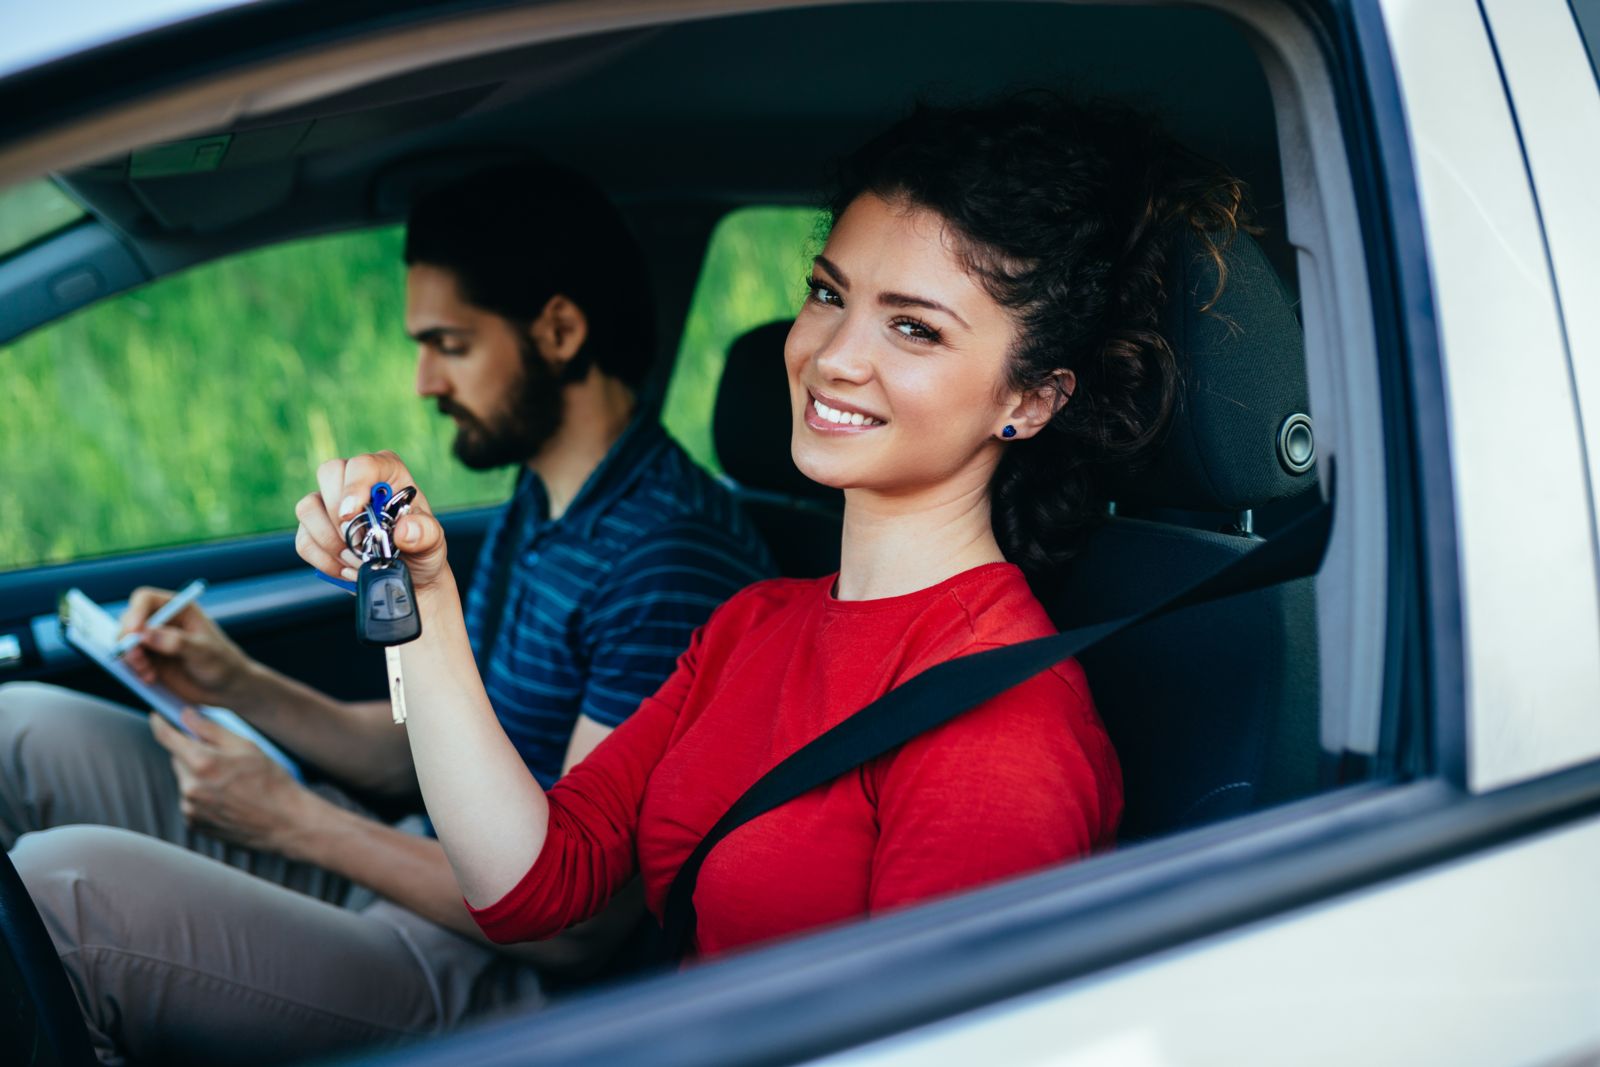 A smiling Caucasian female with black hair wearing a red long-sleeved t-shirt sits in a silver car holding up keys in her right hand while a bearded Caucasian male also with black hair and wearing business casual clothing writes on a paper using a clipboard.